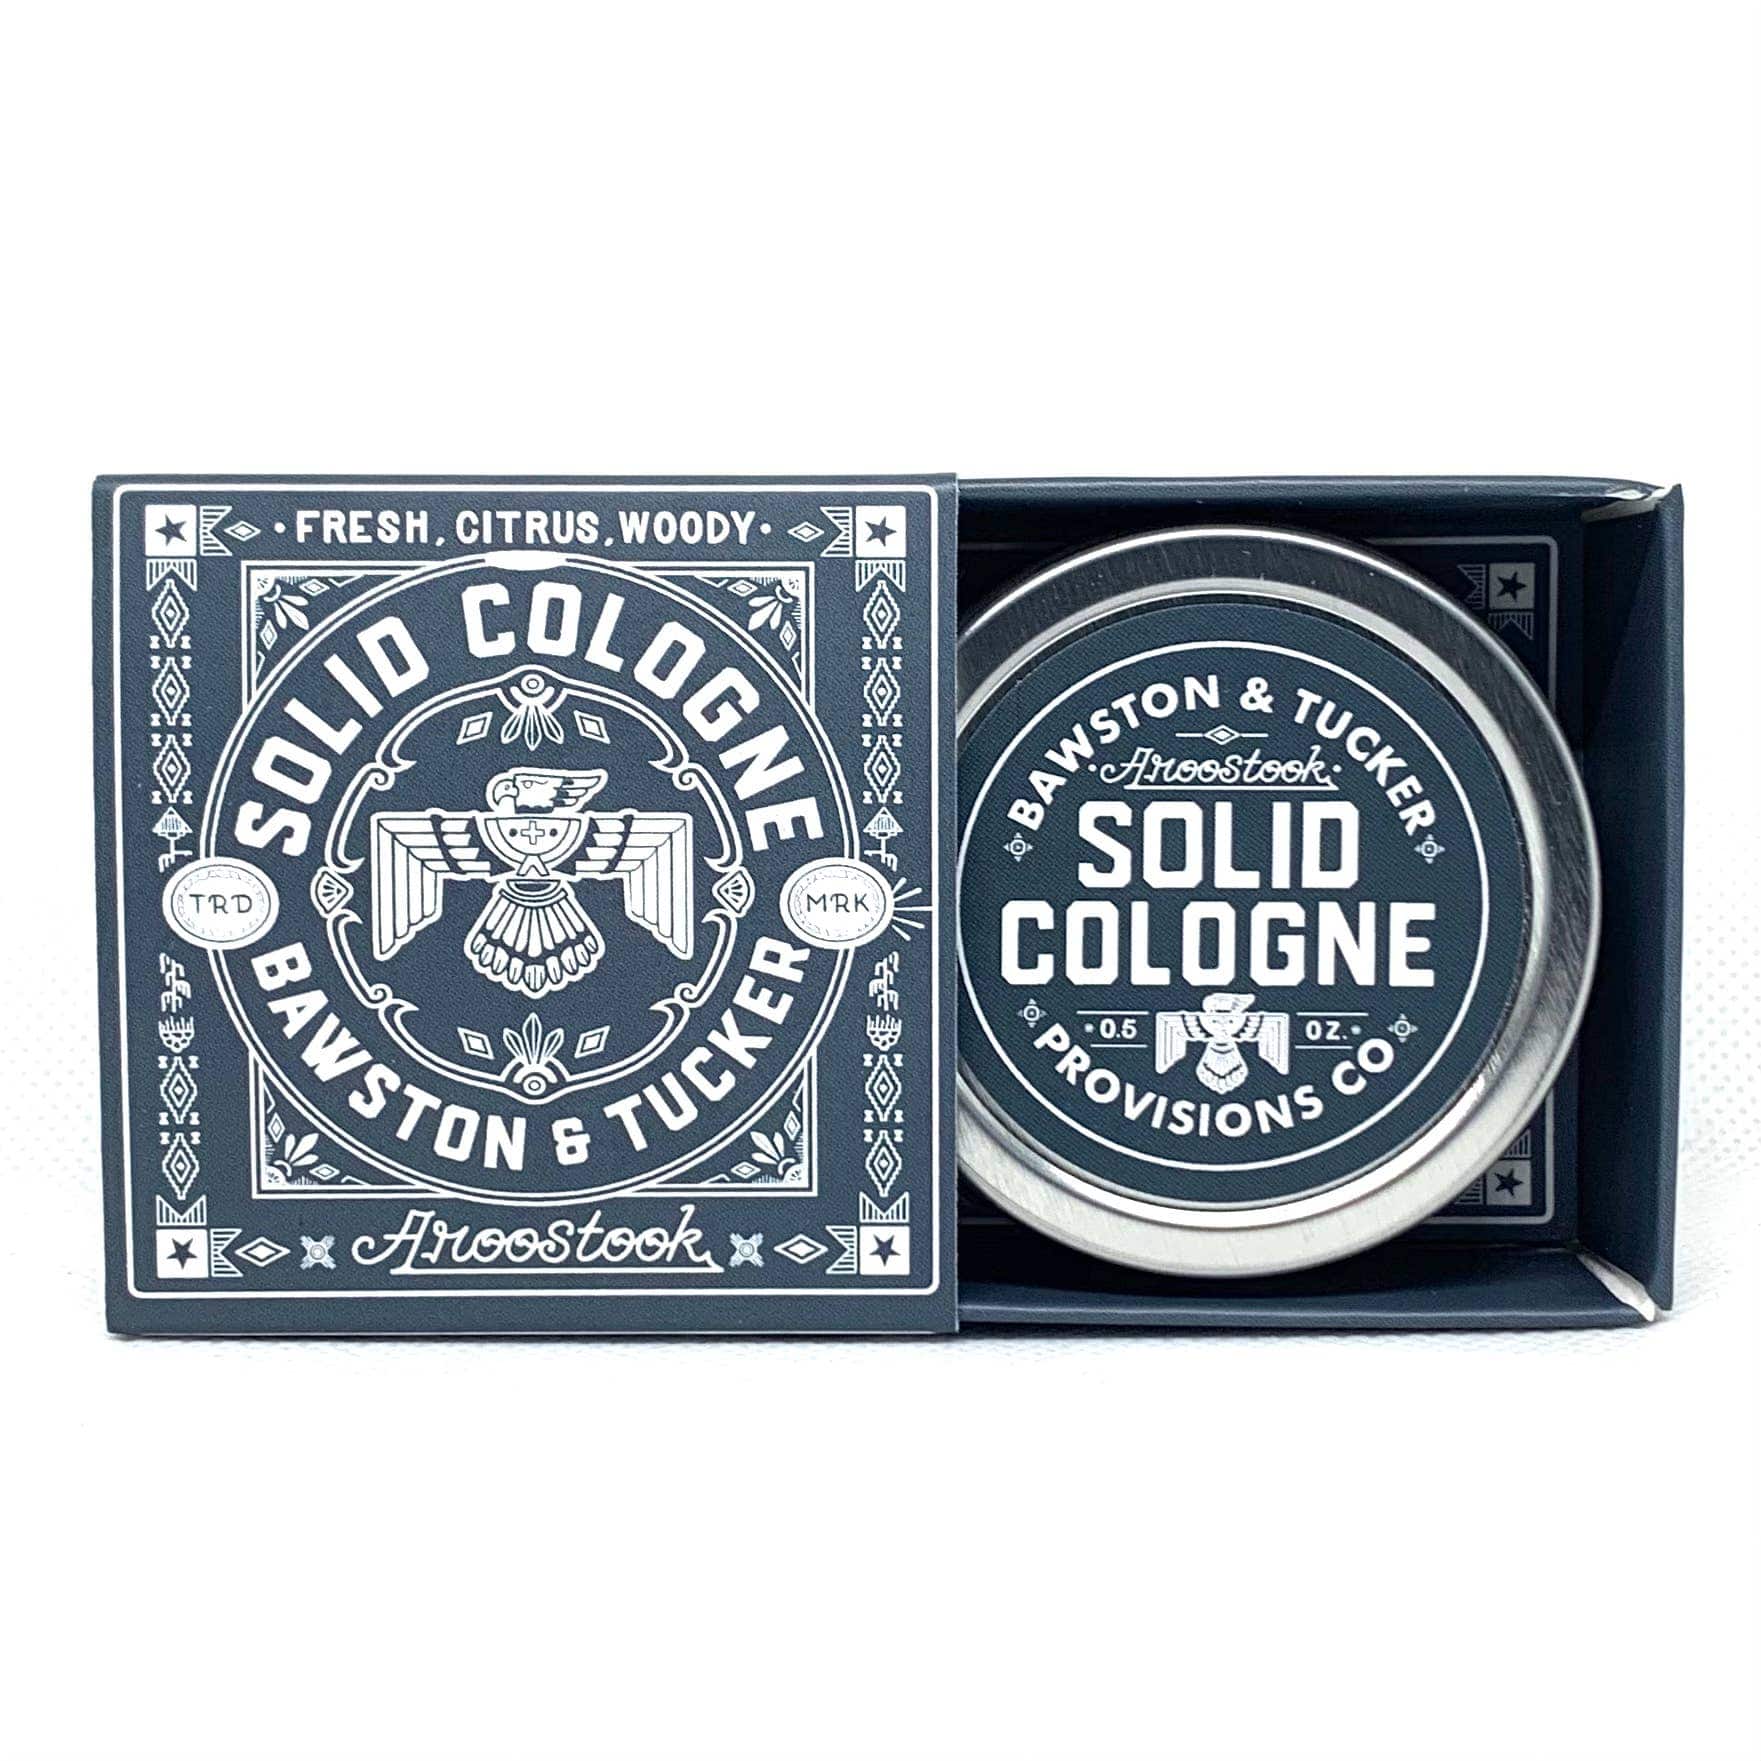 Bawston & Tucker Solid Cologne Aroostook - 1/2 OZ Solid Cologne